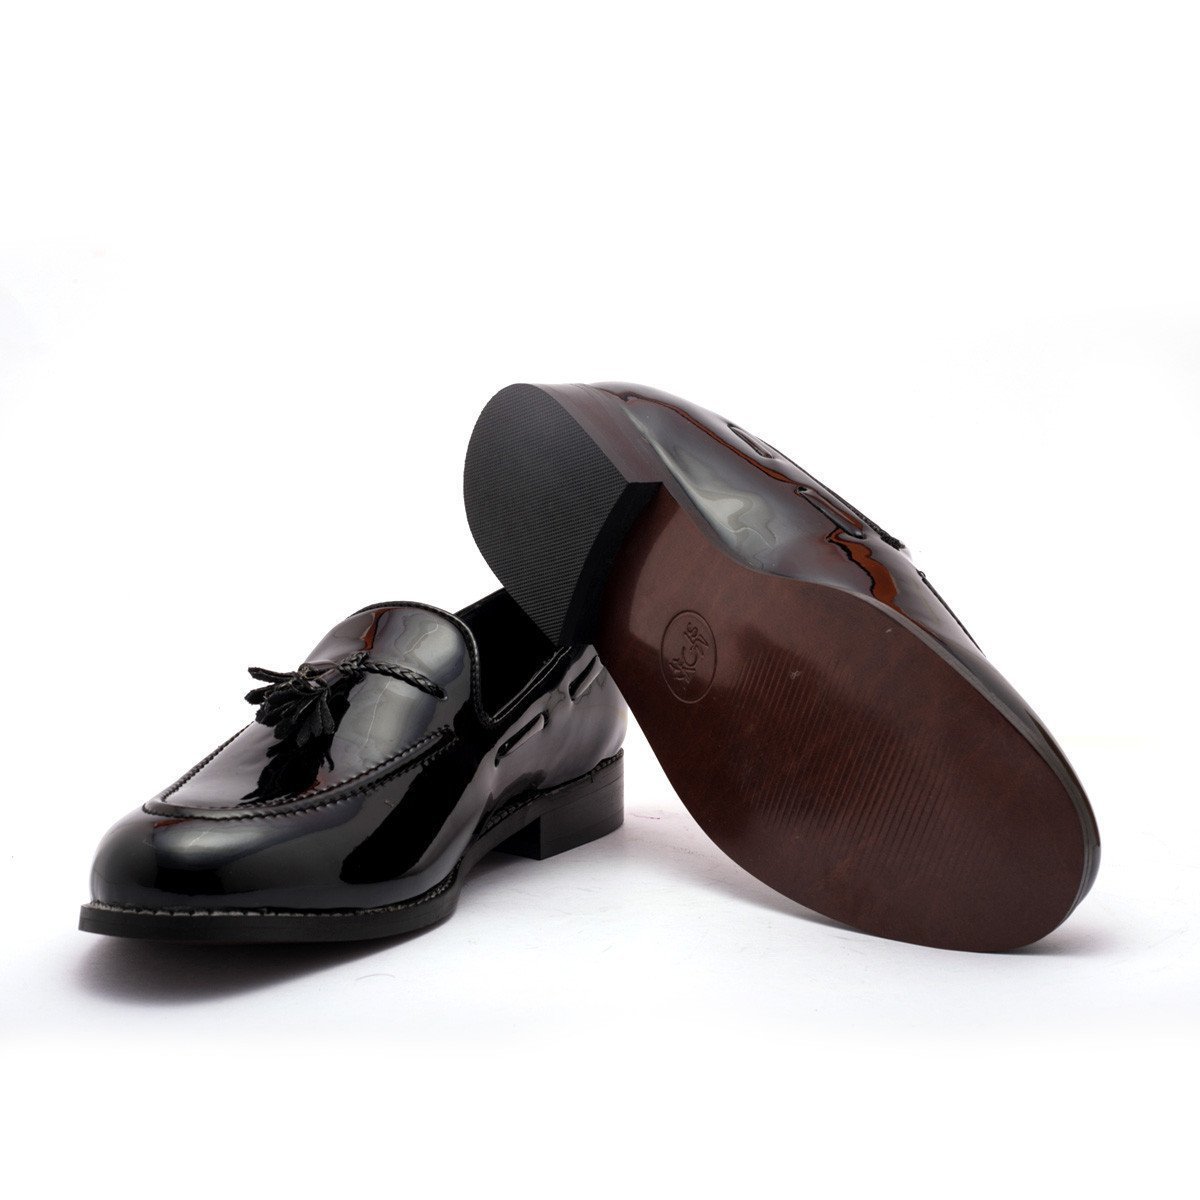 Shoes - Cherokee Loafers - Black